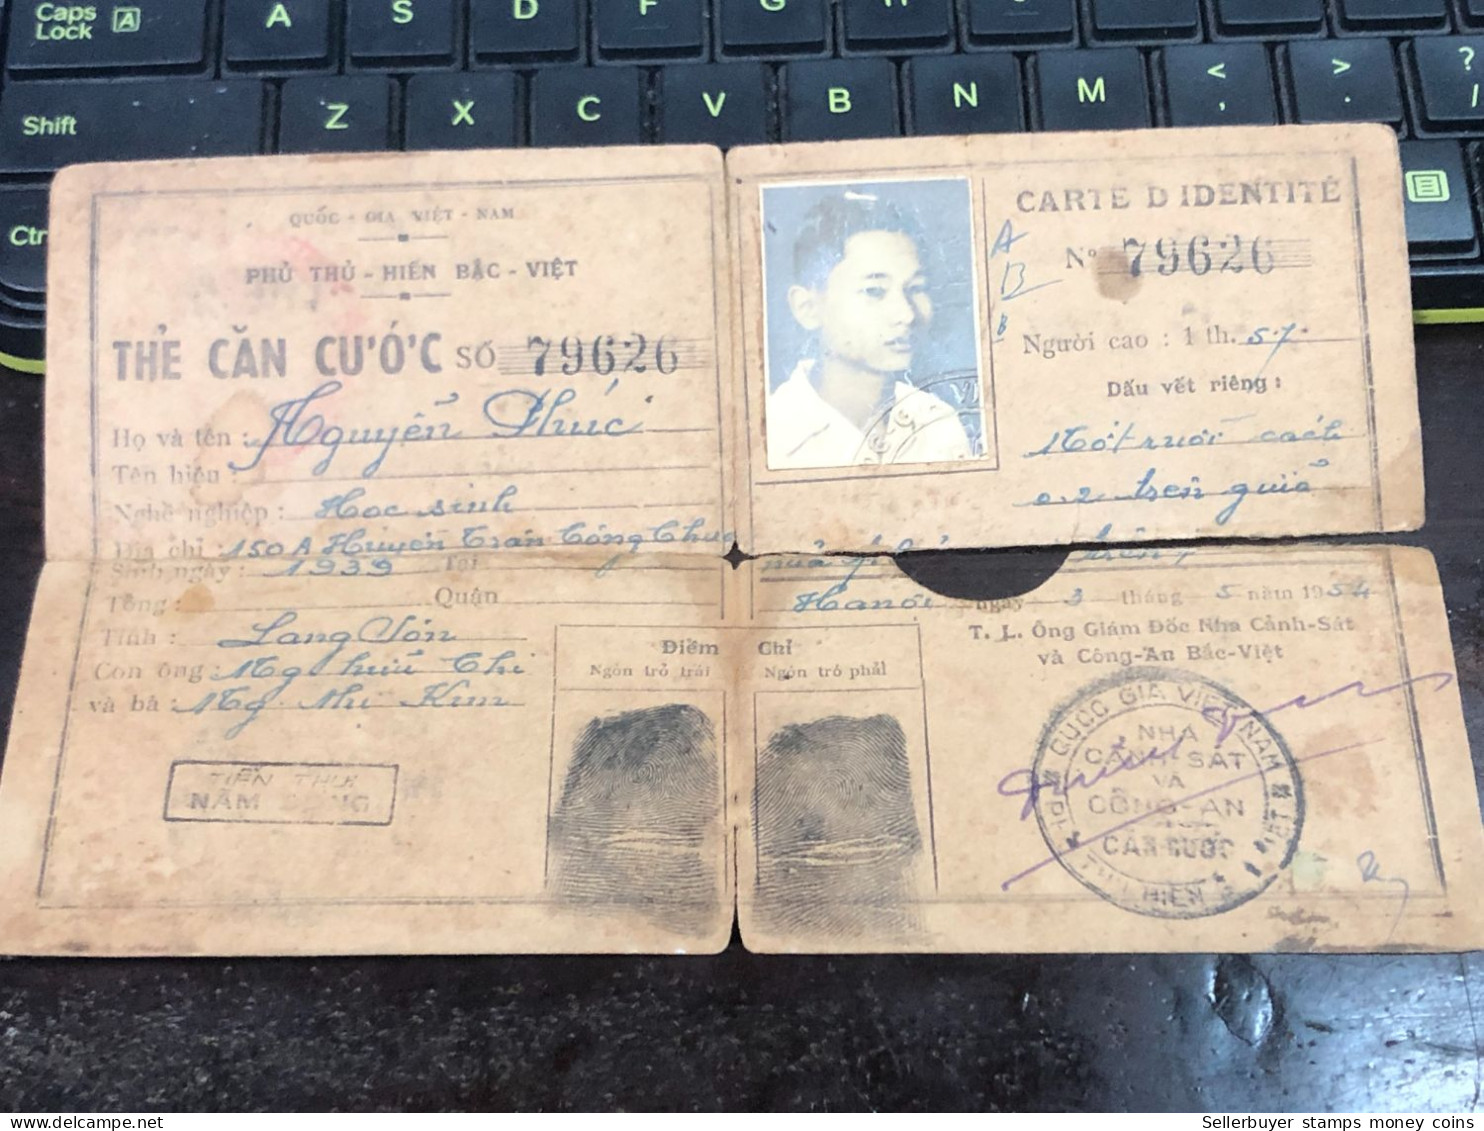 VIET NAM-OLD-ID PASSPORT INDO-CHINA-name-NGUYEN PHUC-1954-1pcs Book - Collections